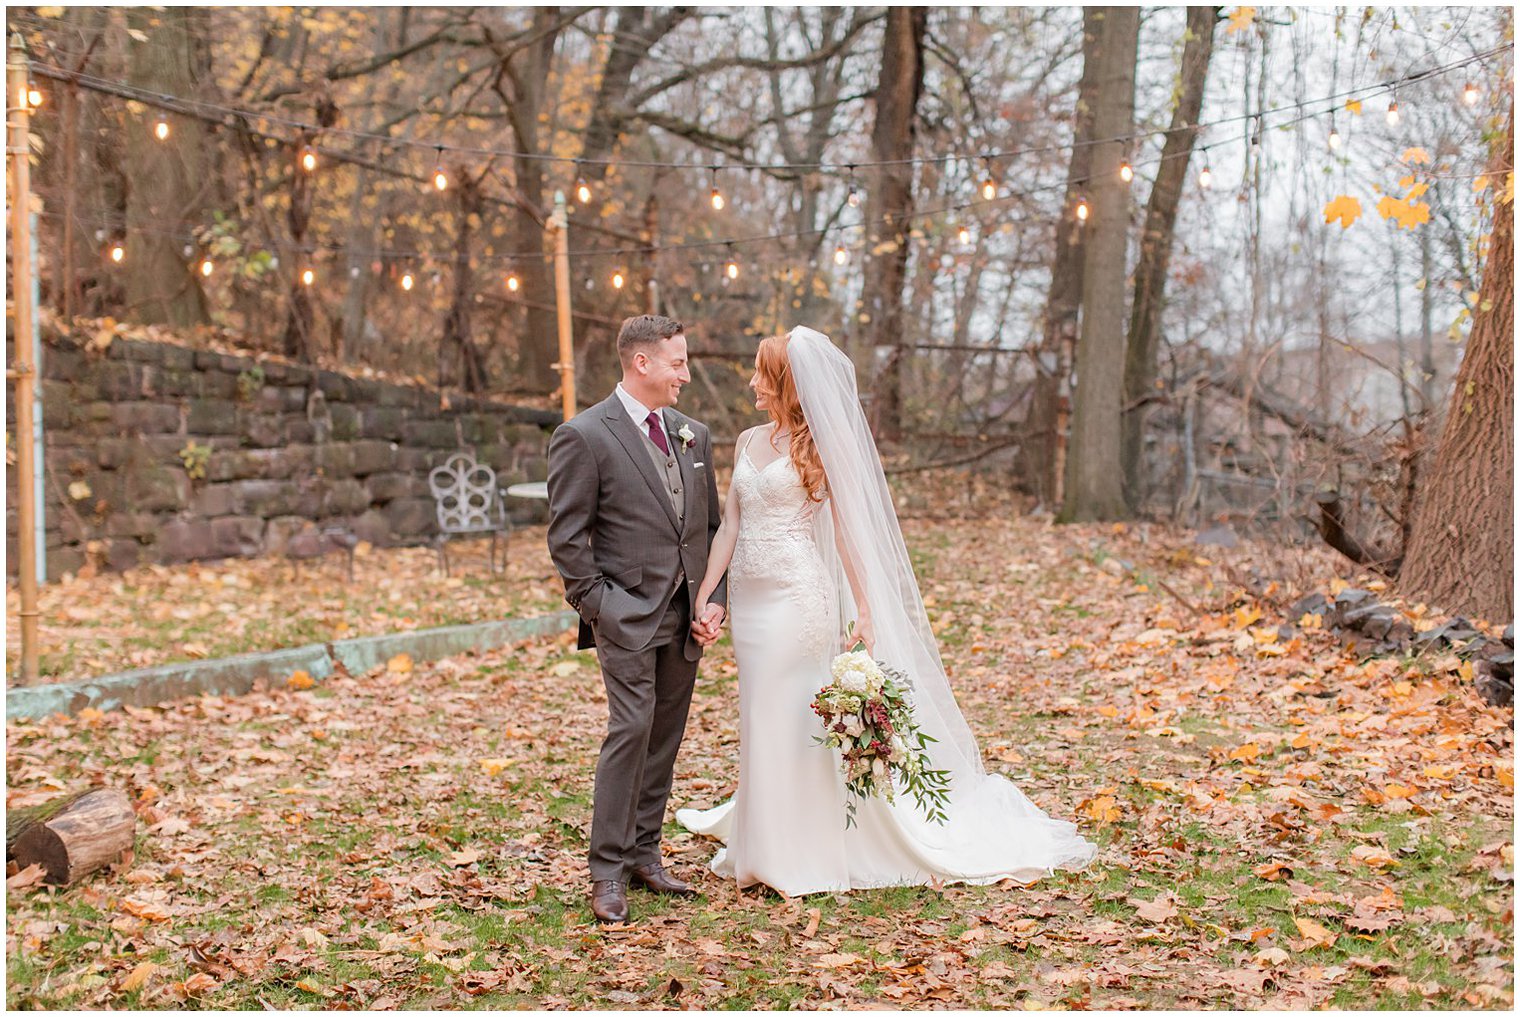 newlyweds pose on leaves in New Jersey photographed by Idalia Photography